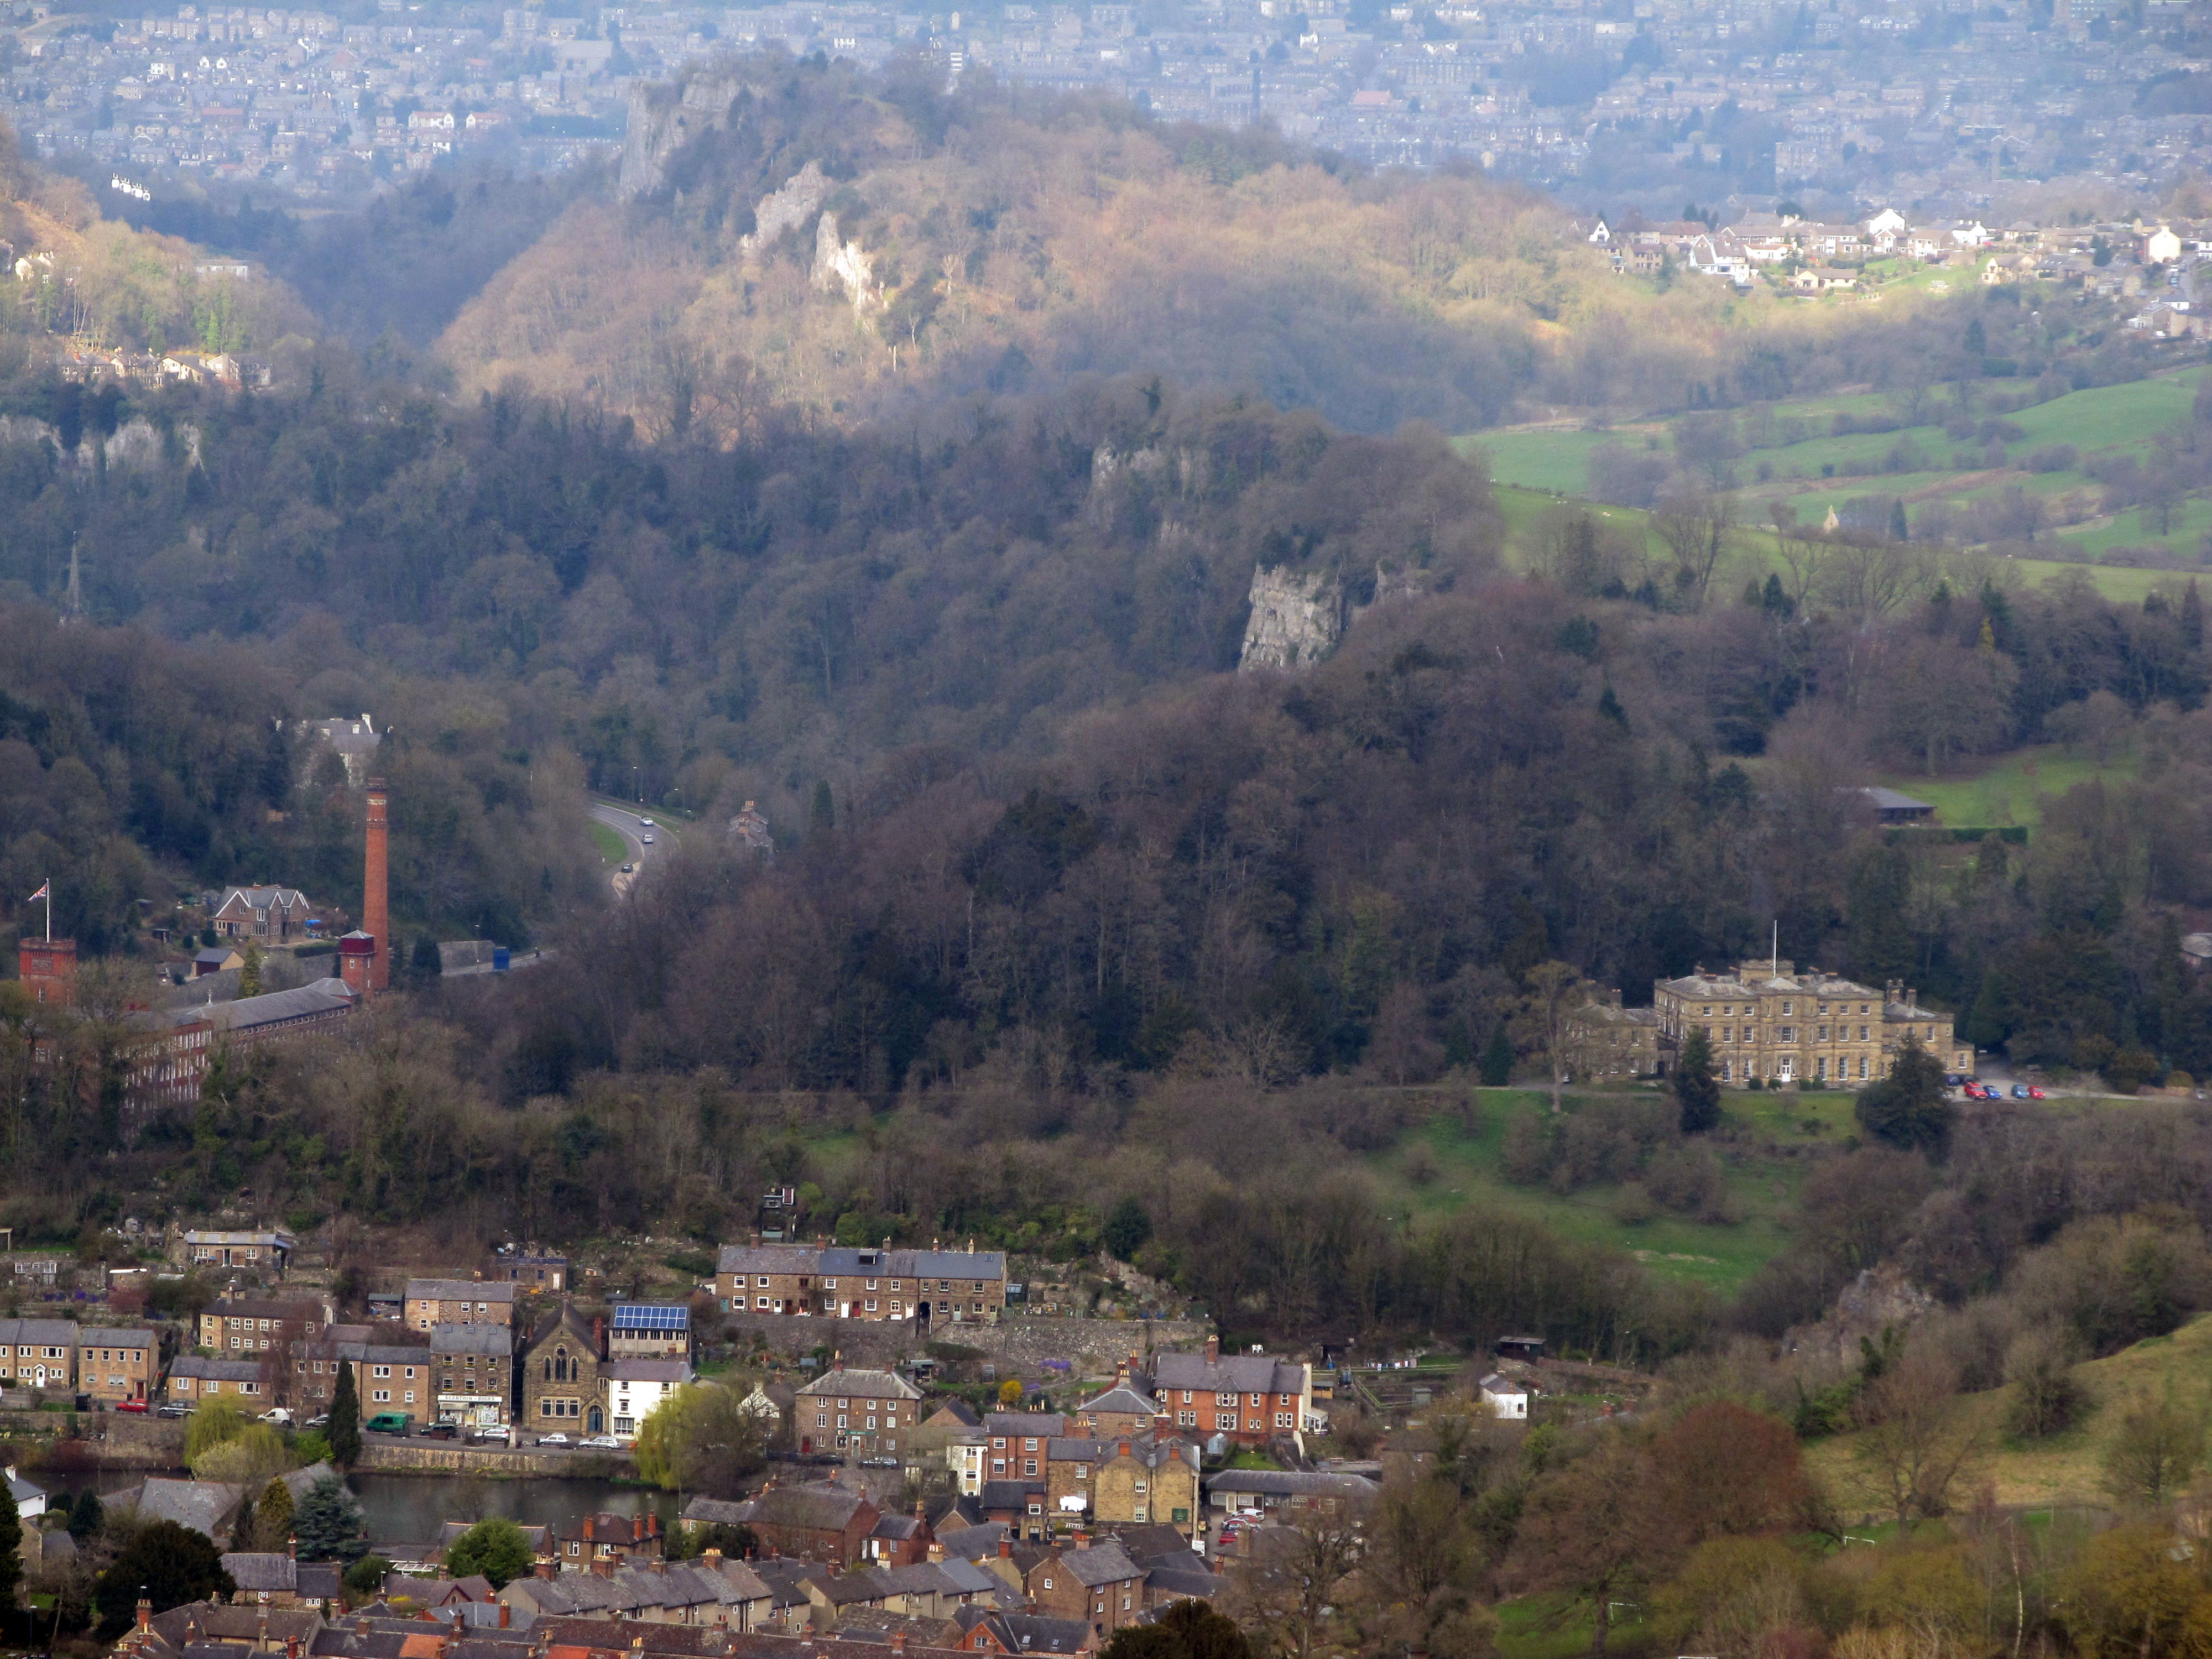 View of Cromford and Matlock Bath from Black Rocks